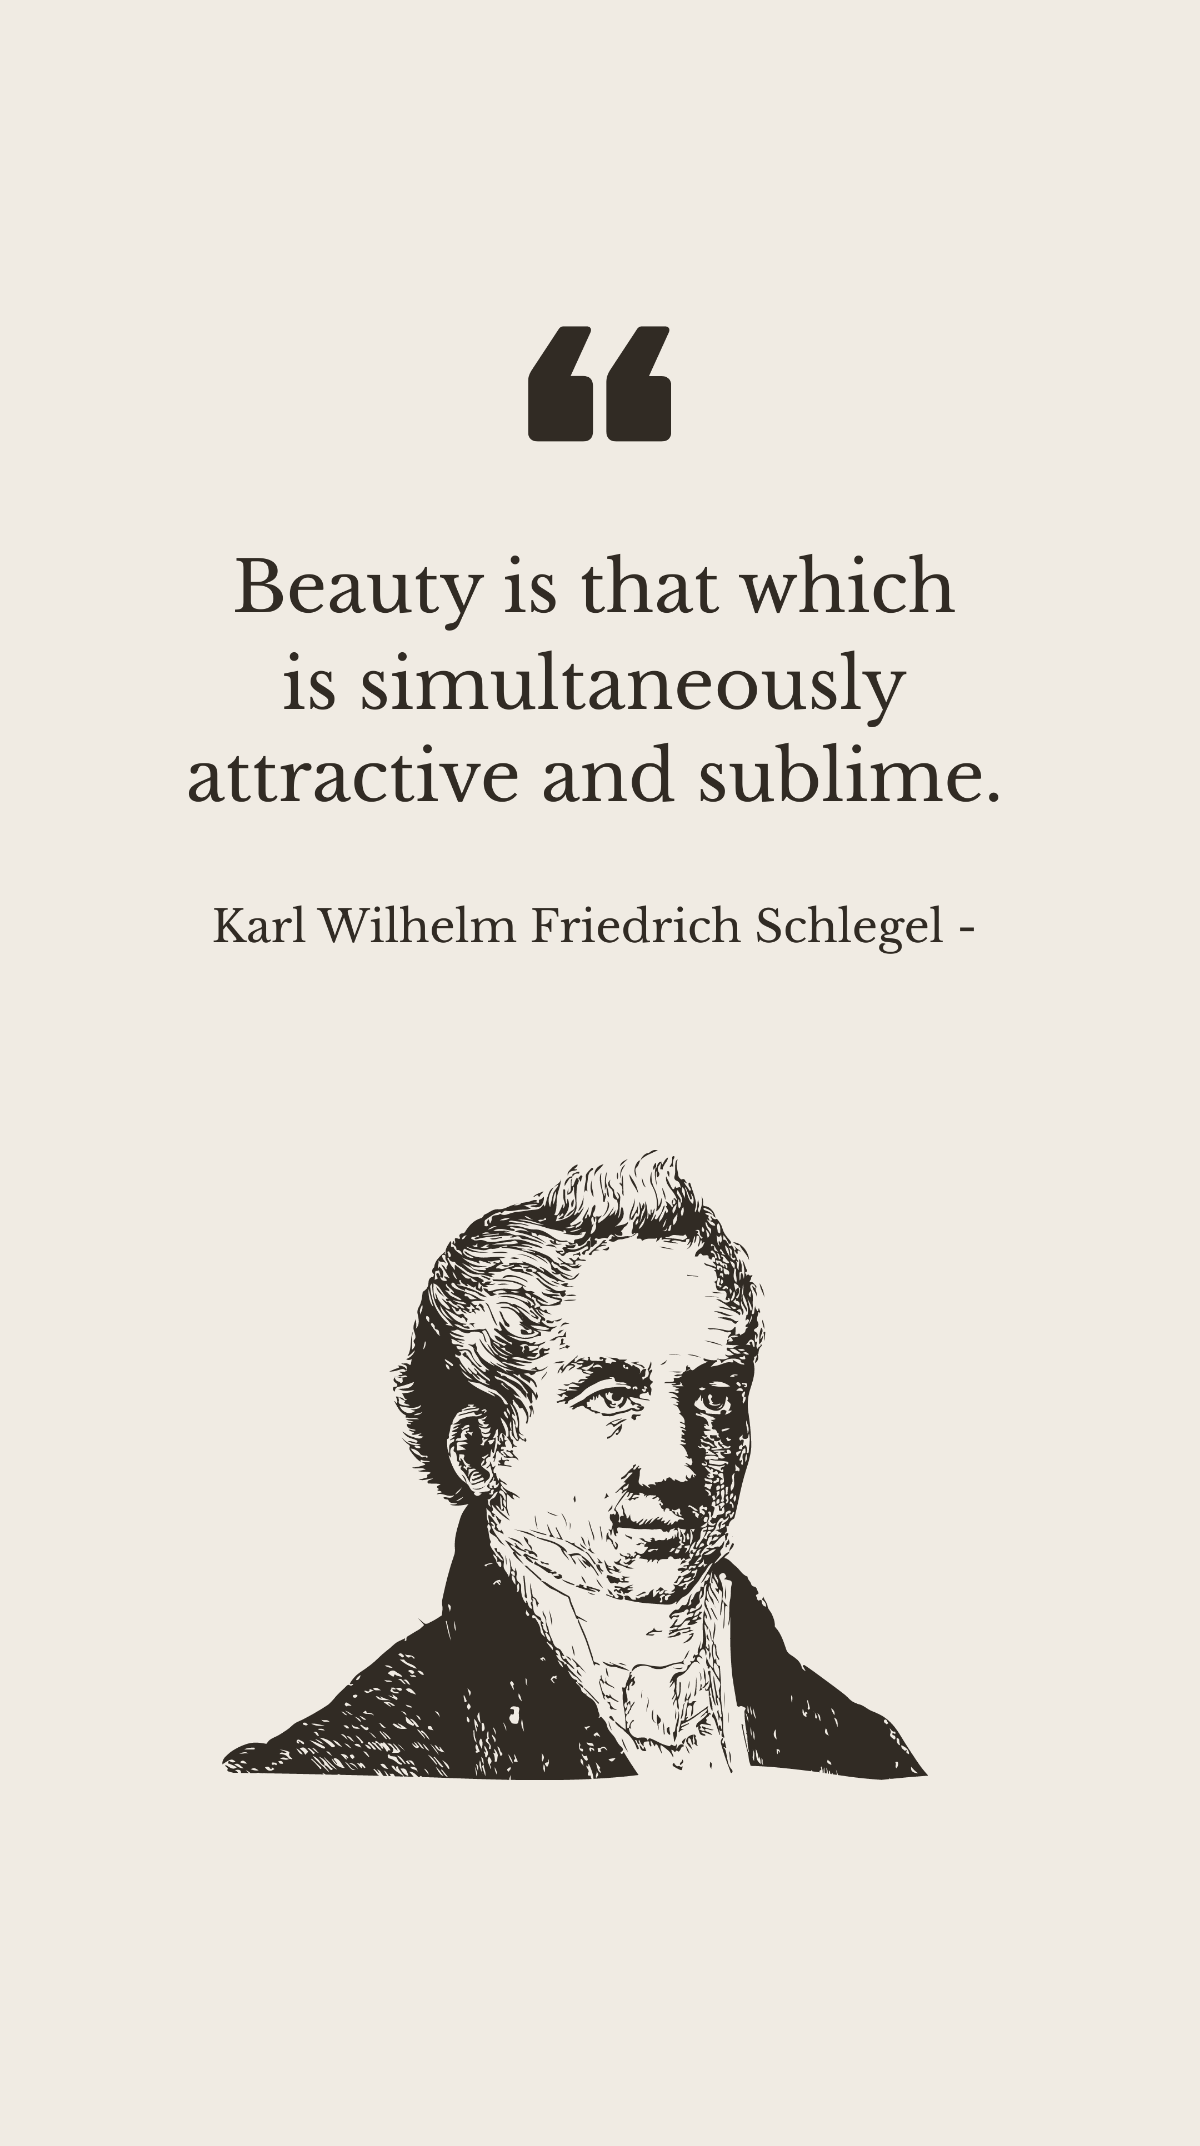 Free Karl Wilhelm Friedrich Schlegel - Beauty is that which is simultaneously attractive and sublime. Template